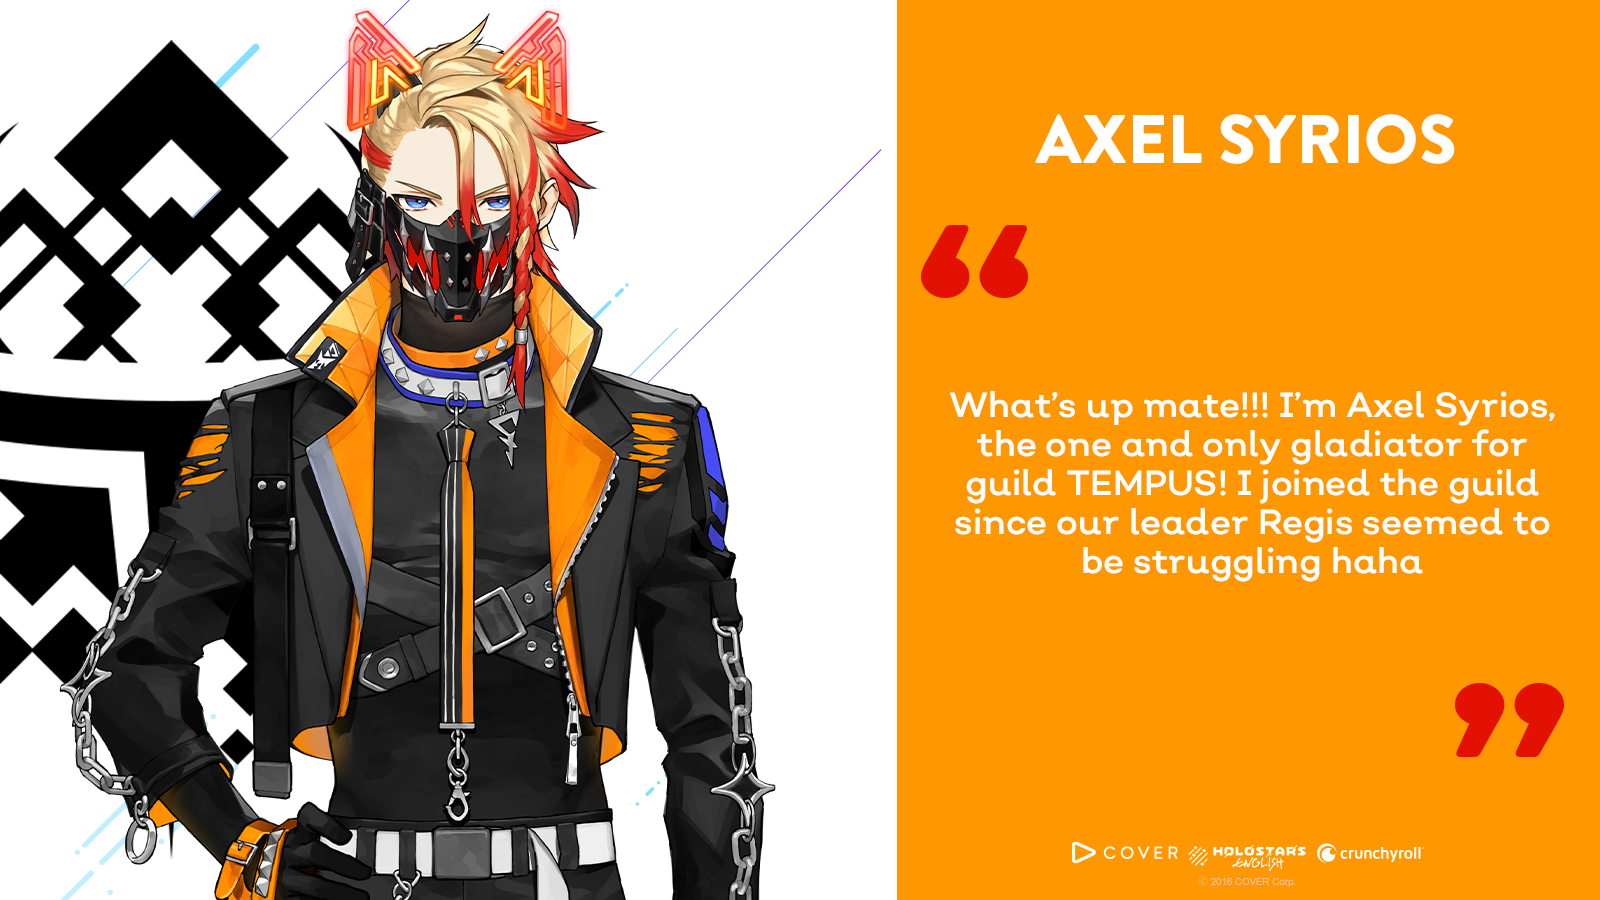 INTERVIEW: VTuber Axel Syrios on Stinky Smells, Character Alignment, and Never Giving Up